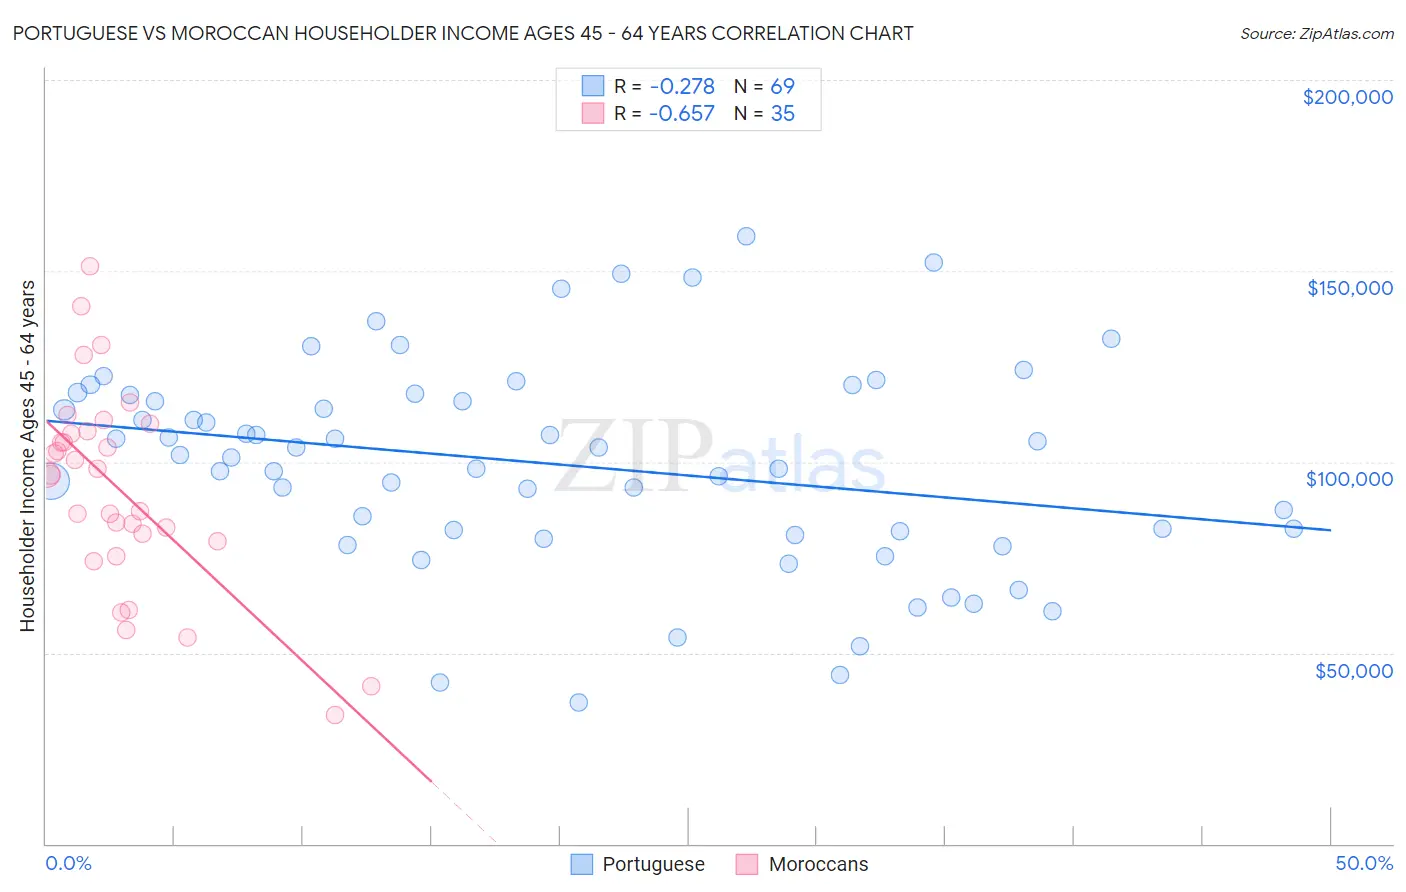 Portuguese vs Moroccan Householder Income Ages 45 - 64 years